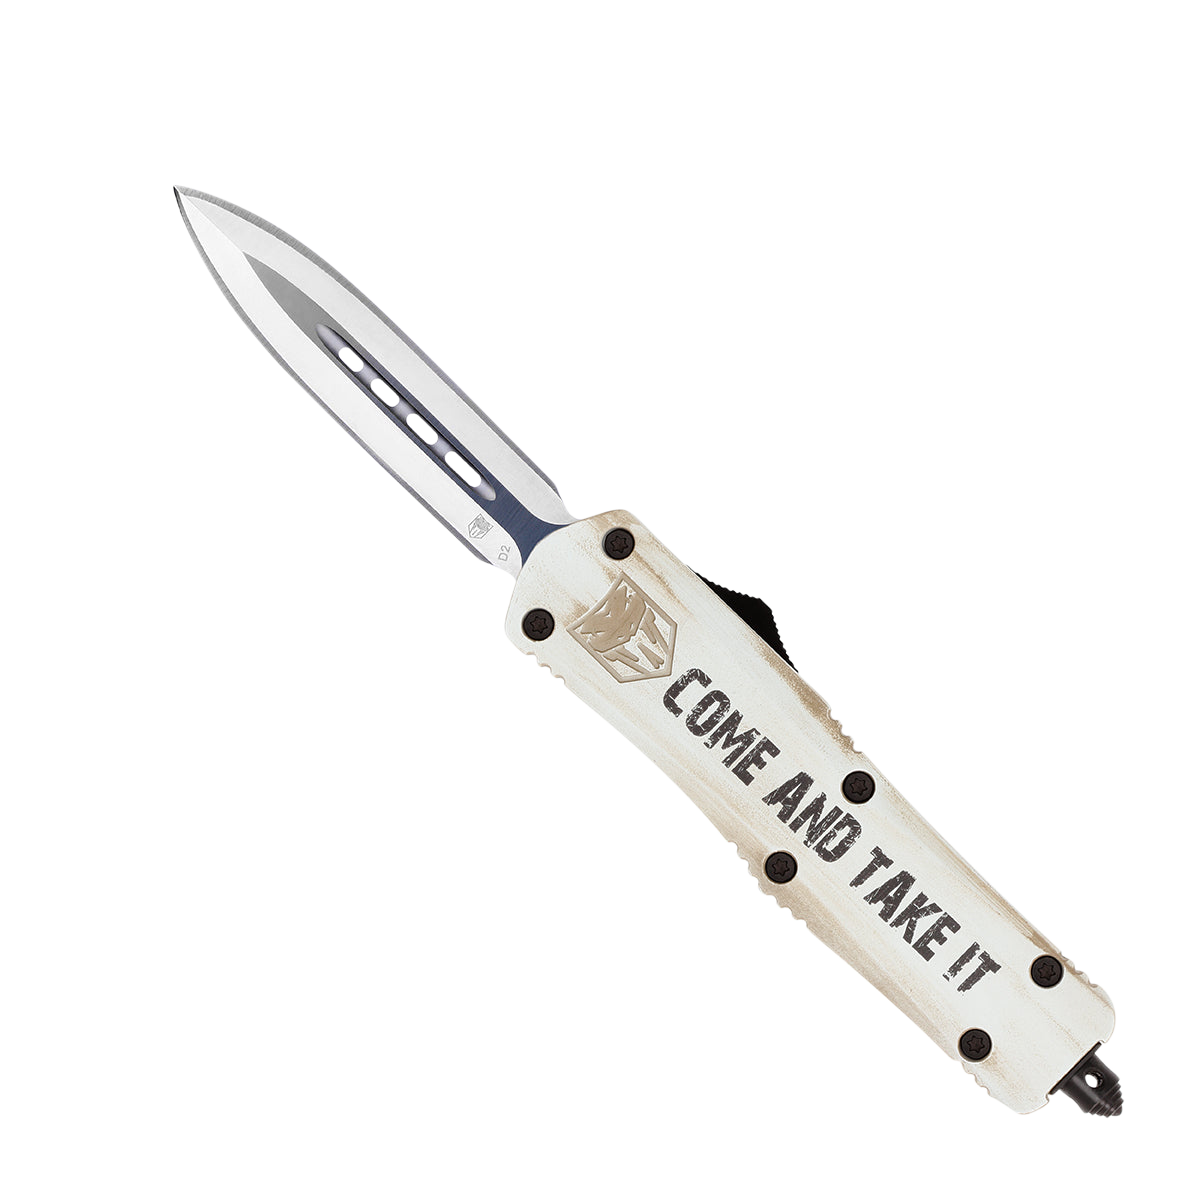 CobraTec Knives MCATIFS3DAGNS FS-3 Come And Take It Medium 3" OTF Dagger Plain D2 Steel Blade White w/"Come And Take It" Aluminum Cerakoted Handle Features Glass Breaker Includes Pocket Clip